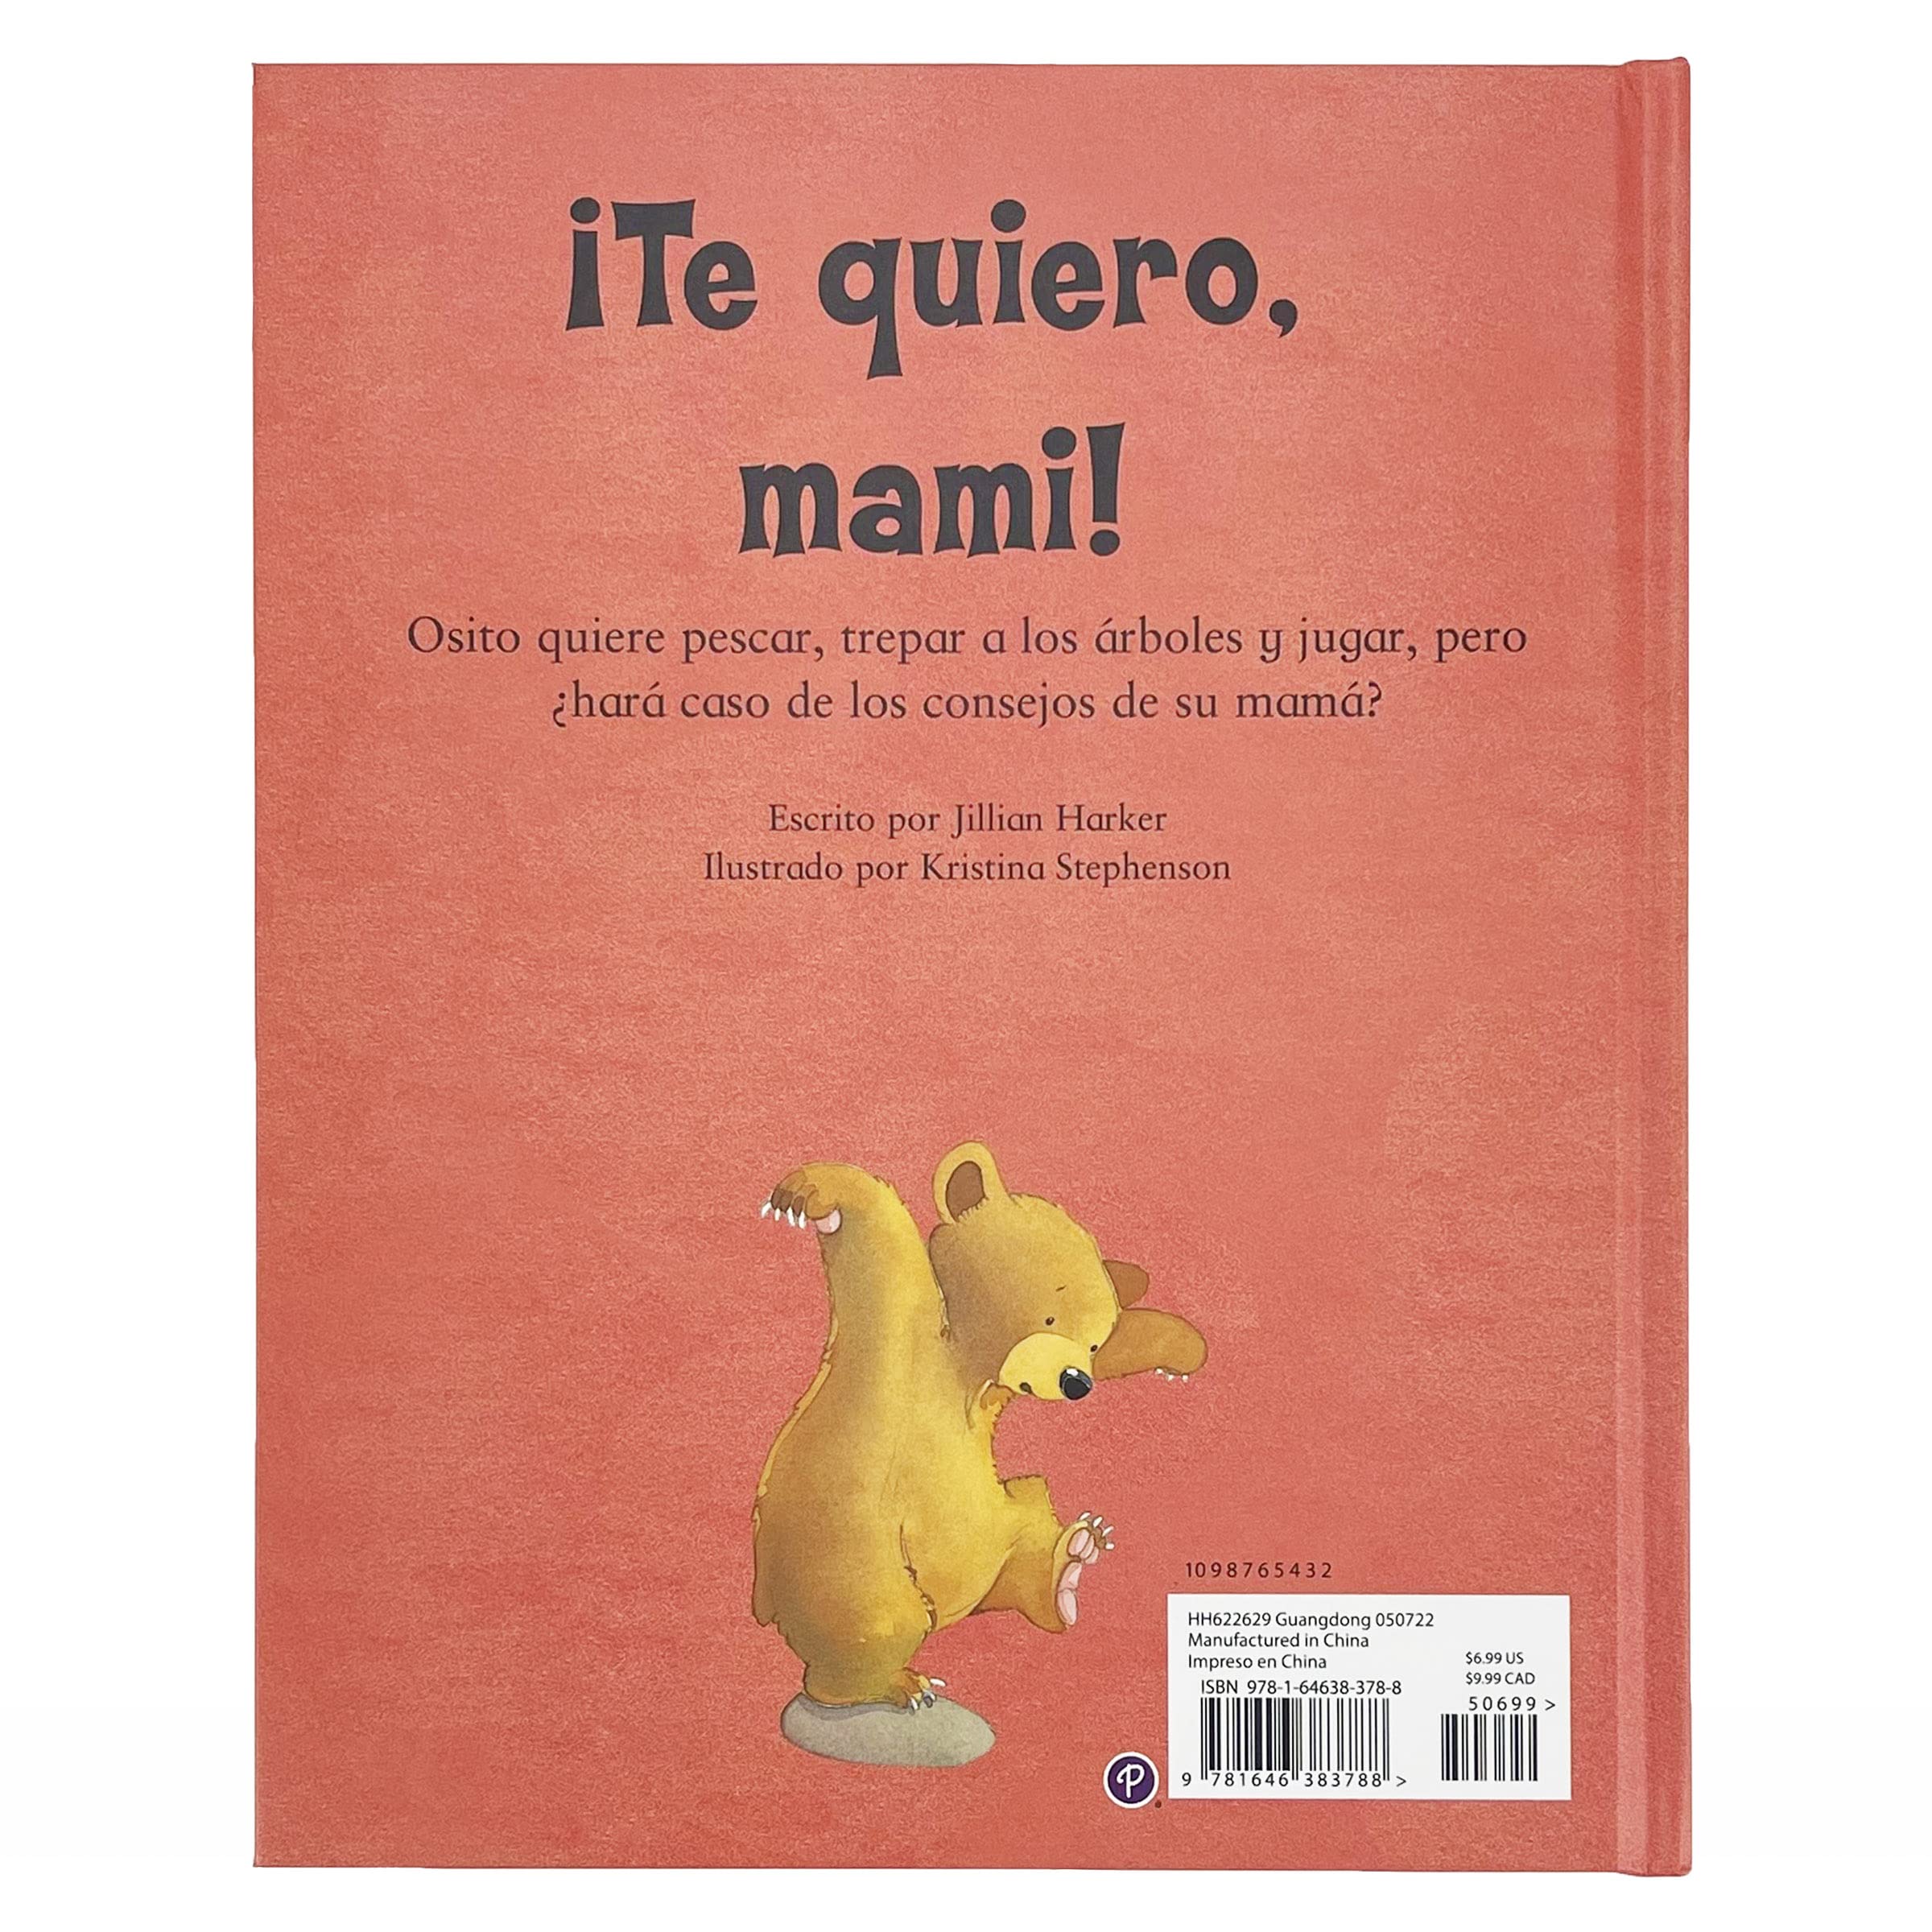 ¡Te quiero, mami! / I Love You, Mommy: A Tale of Encouragement and Parental Love between a Mother and her Child, Ages 3-6 (Spanish Edition)